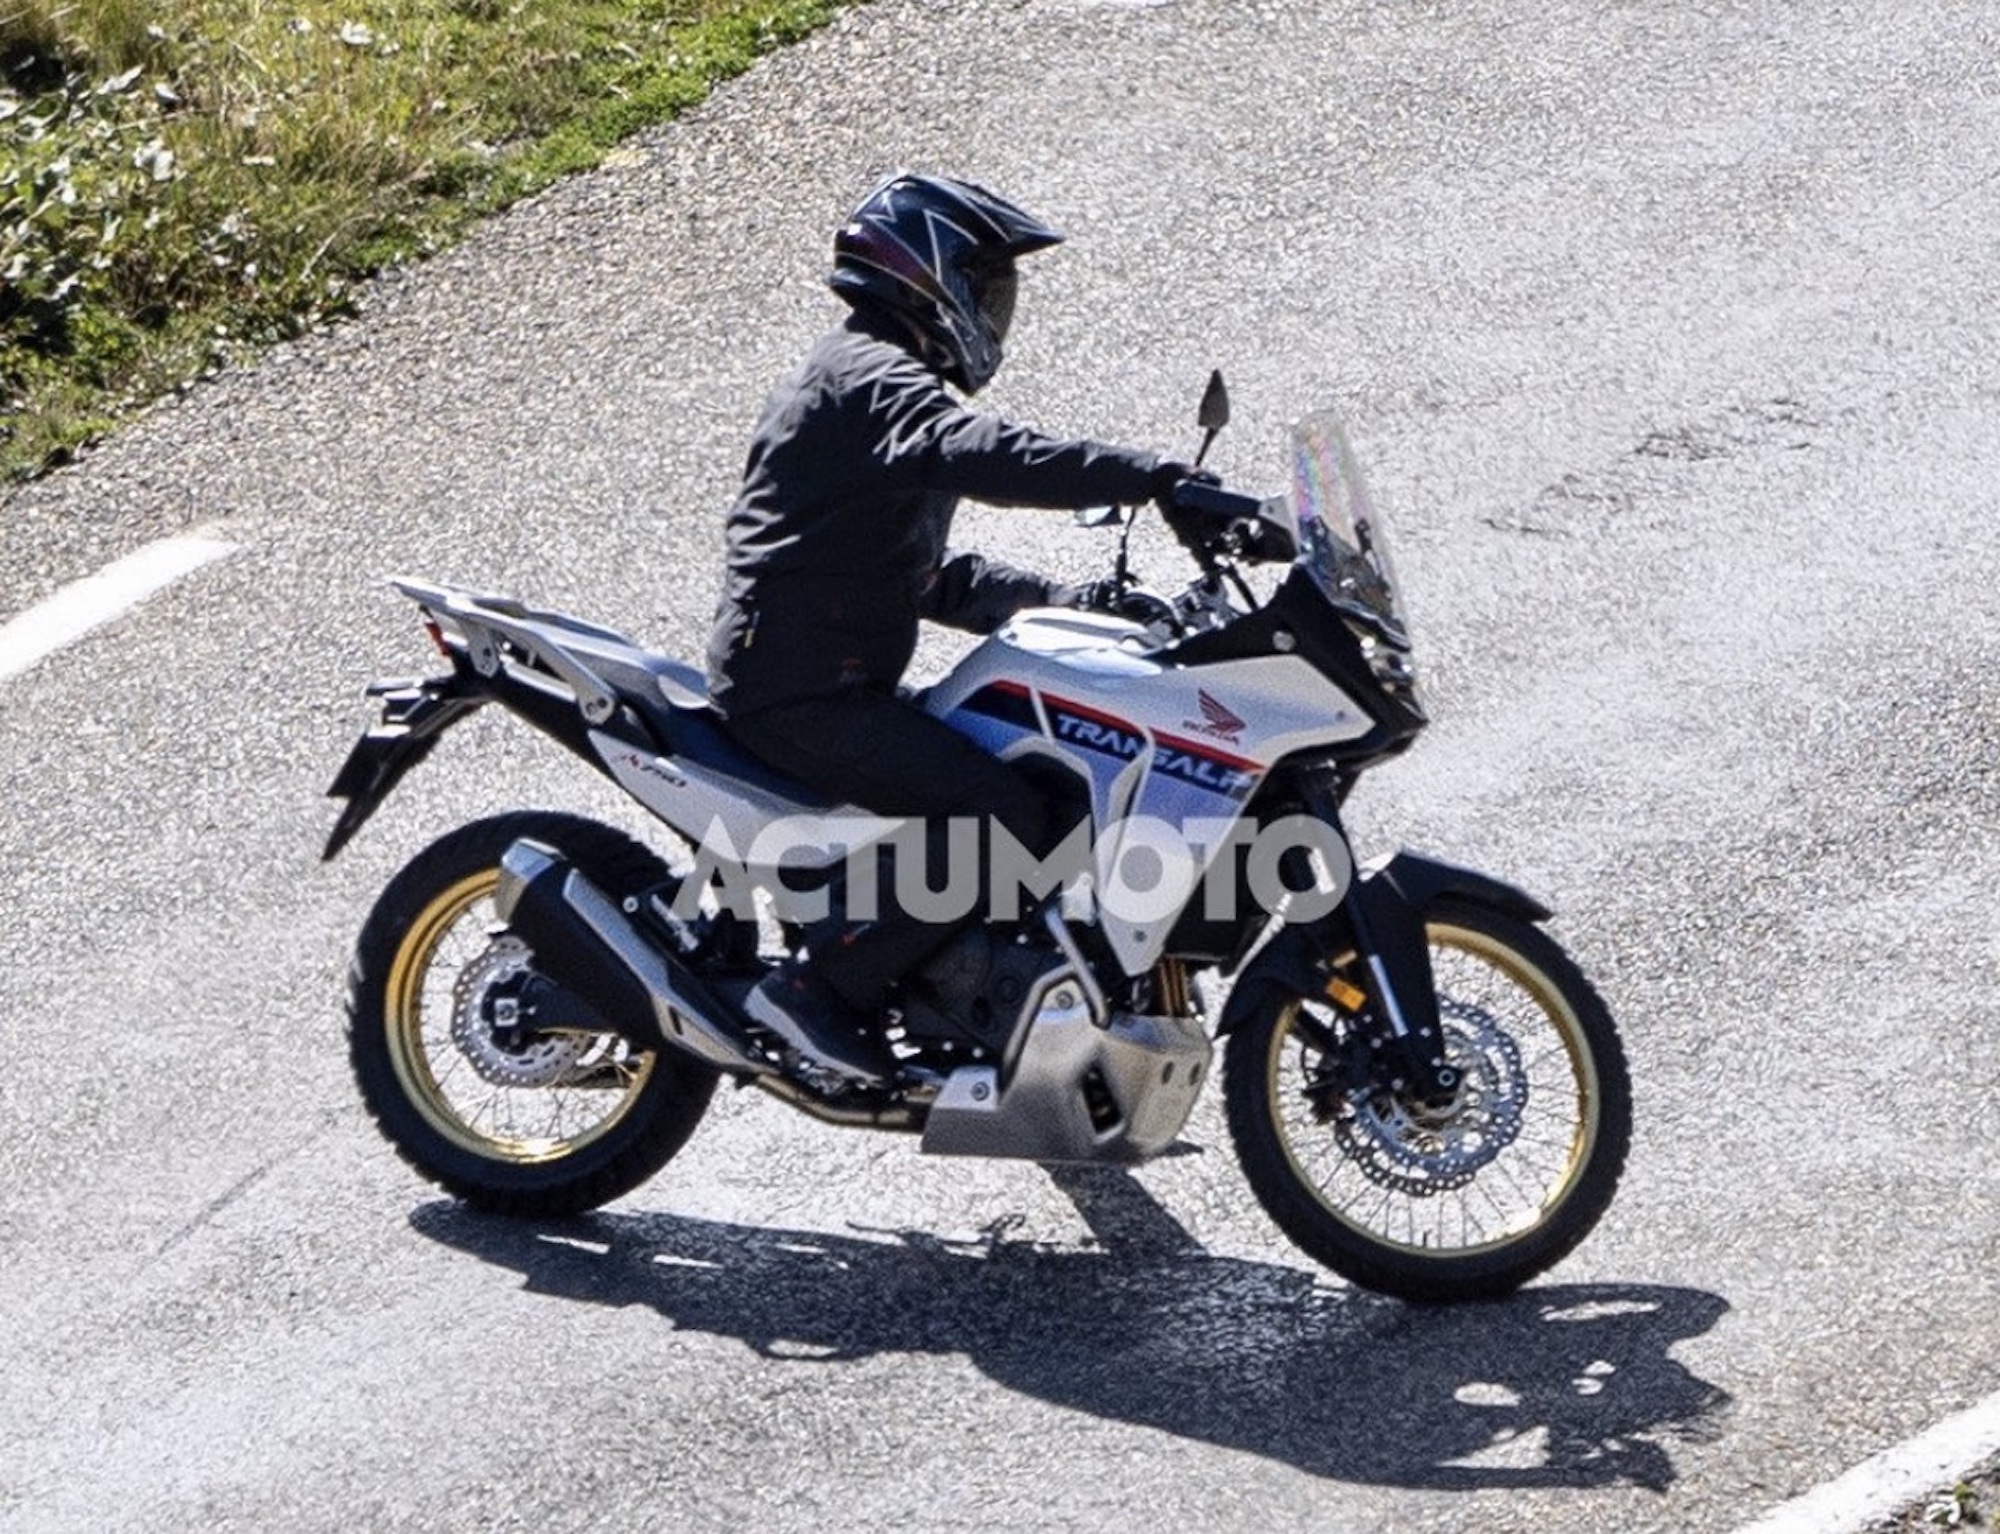 Spy shots show Honda is on the way of delivering a Transalpine-esque machine - possibly even in time for this year's EICMA. Media sourced from ACUMOTO's Instagram page.